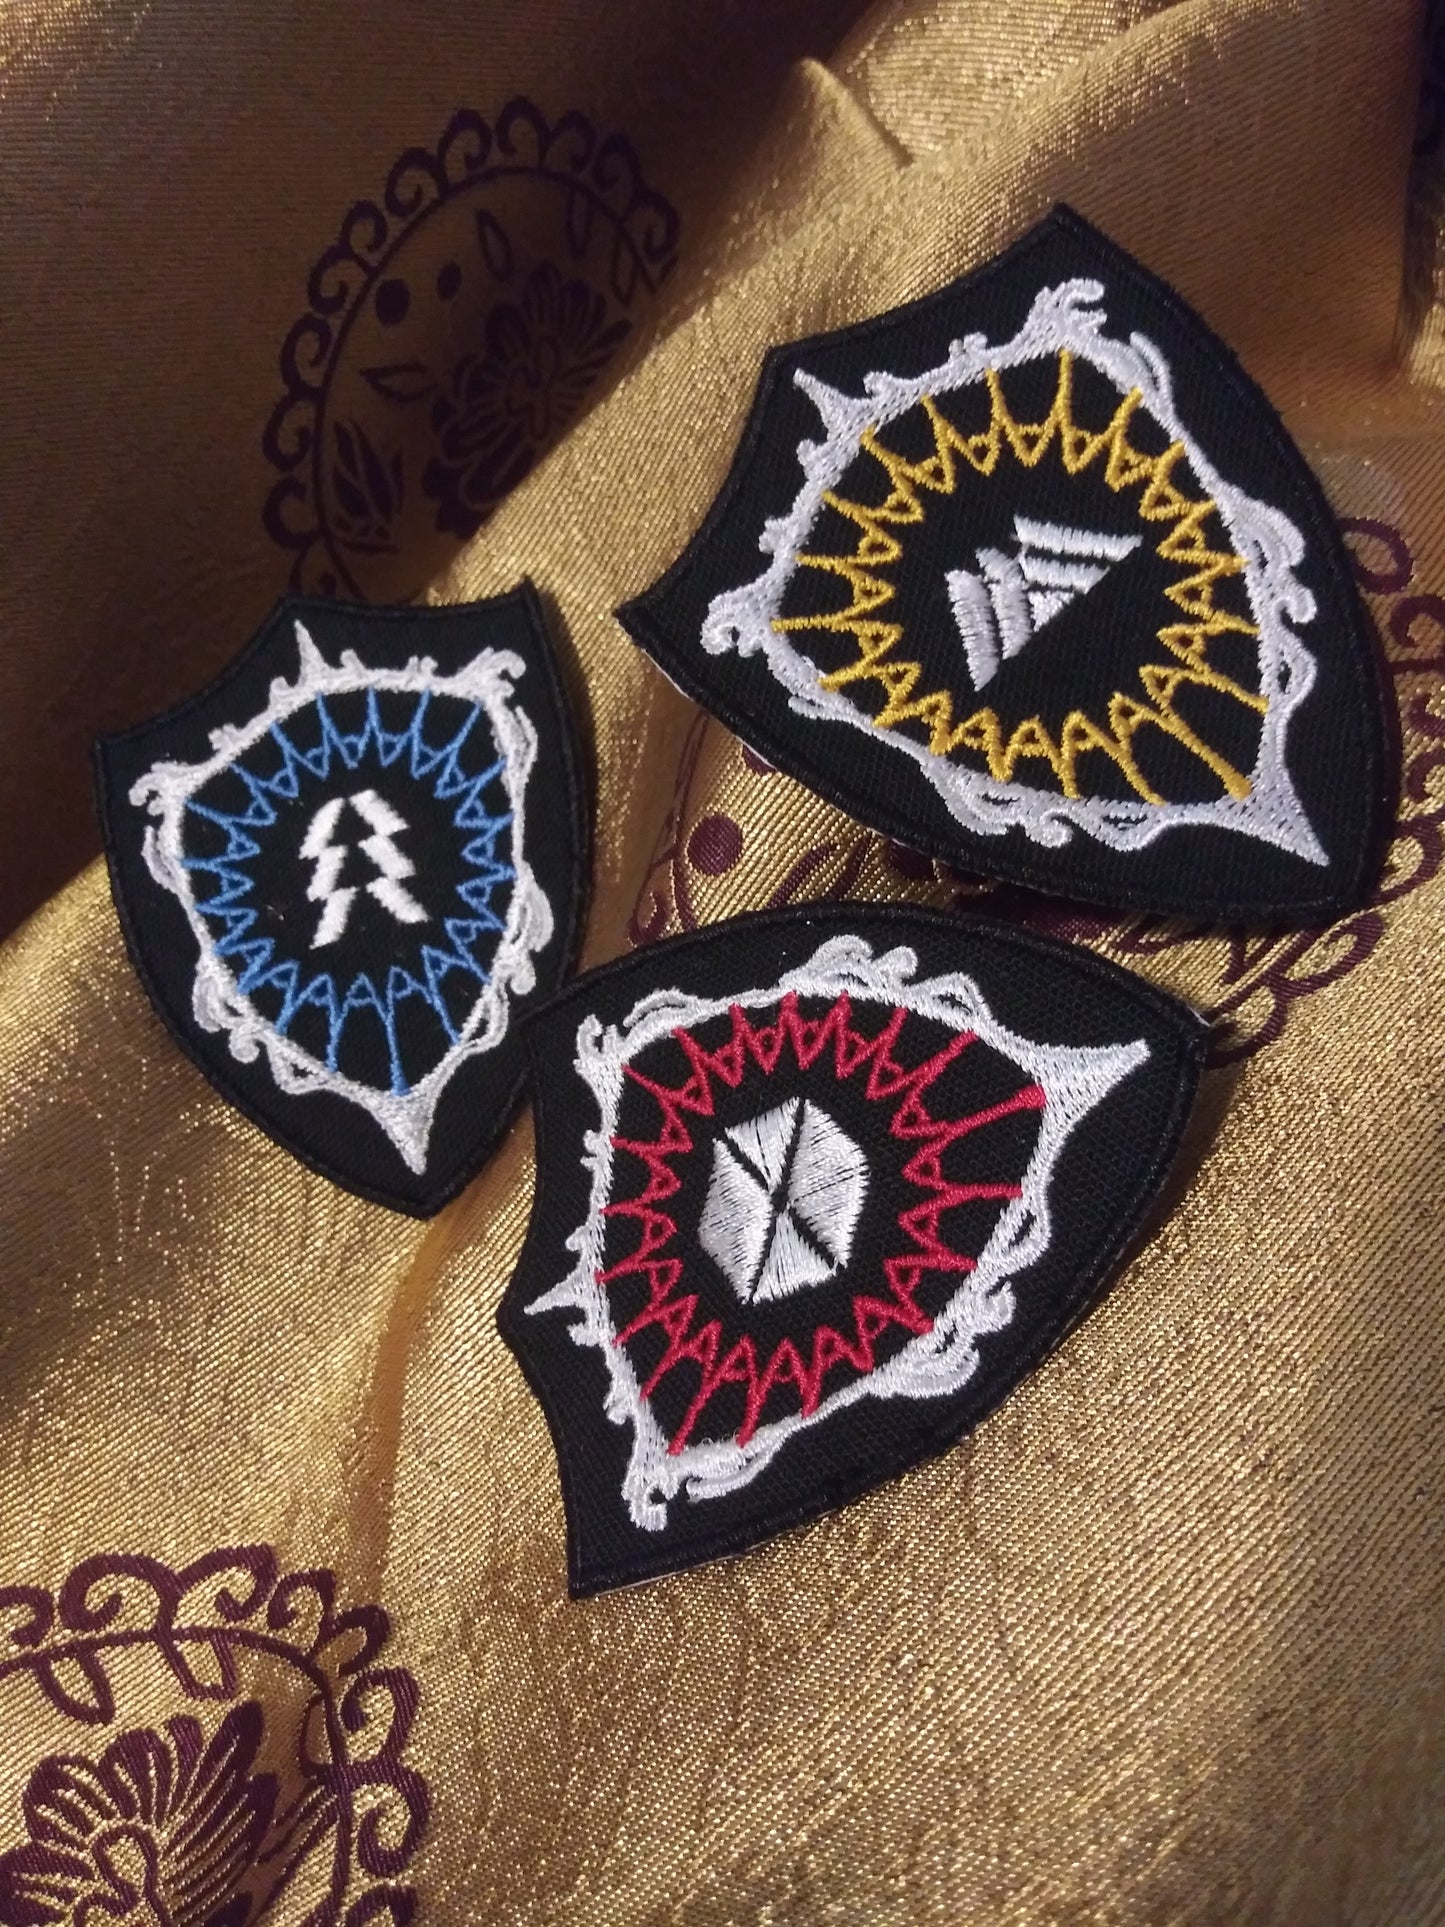 Shield class patches